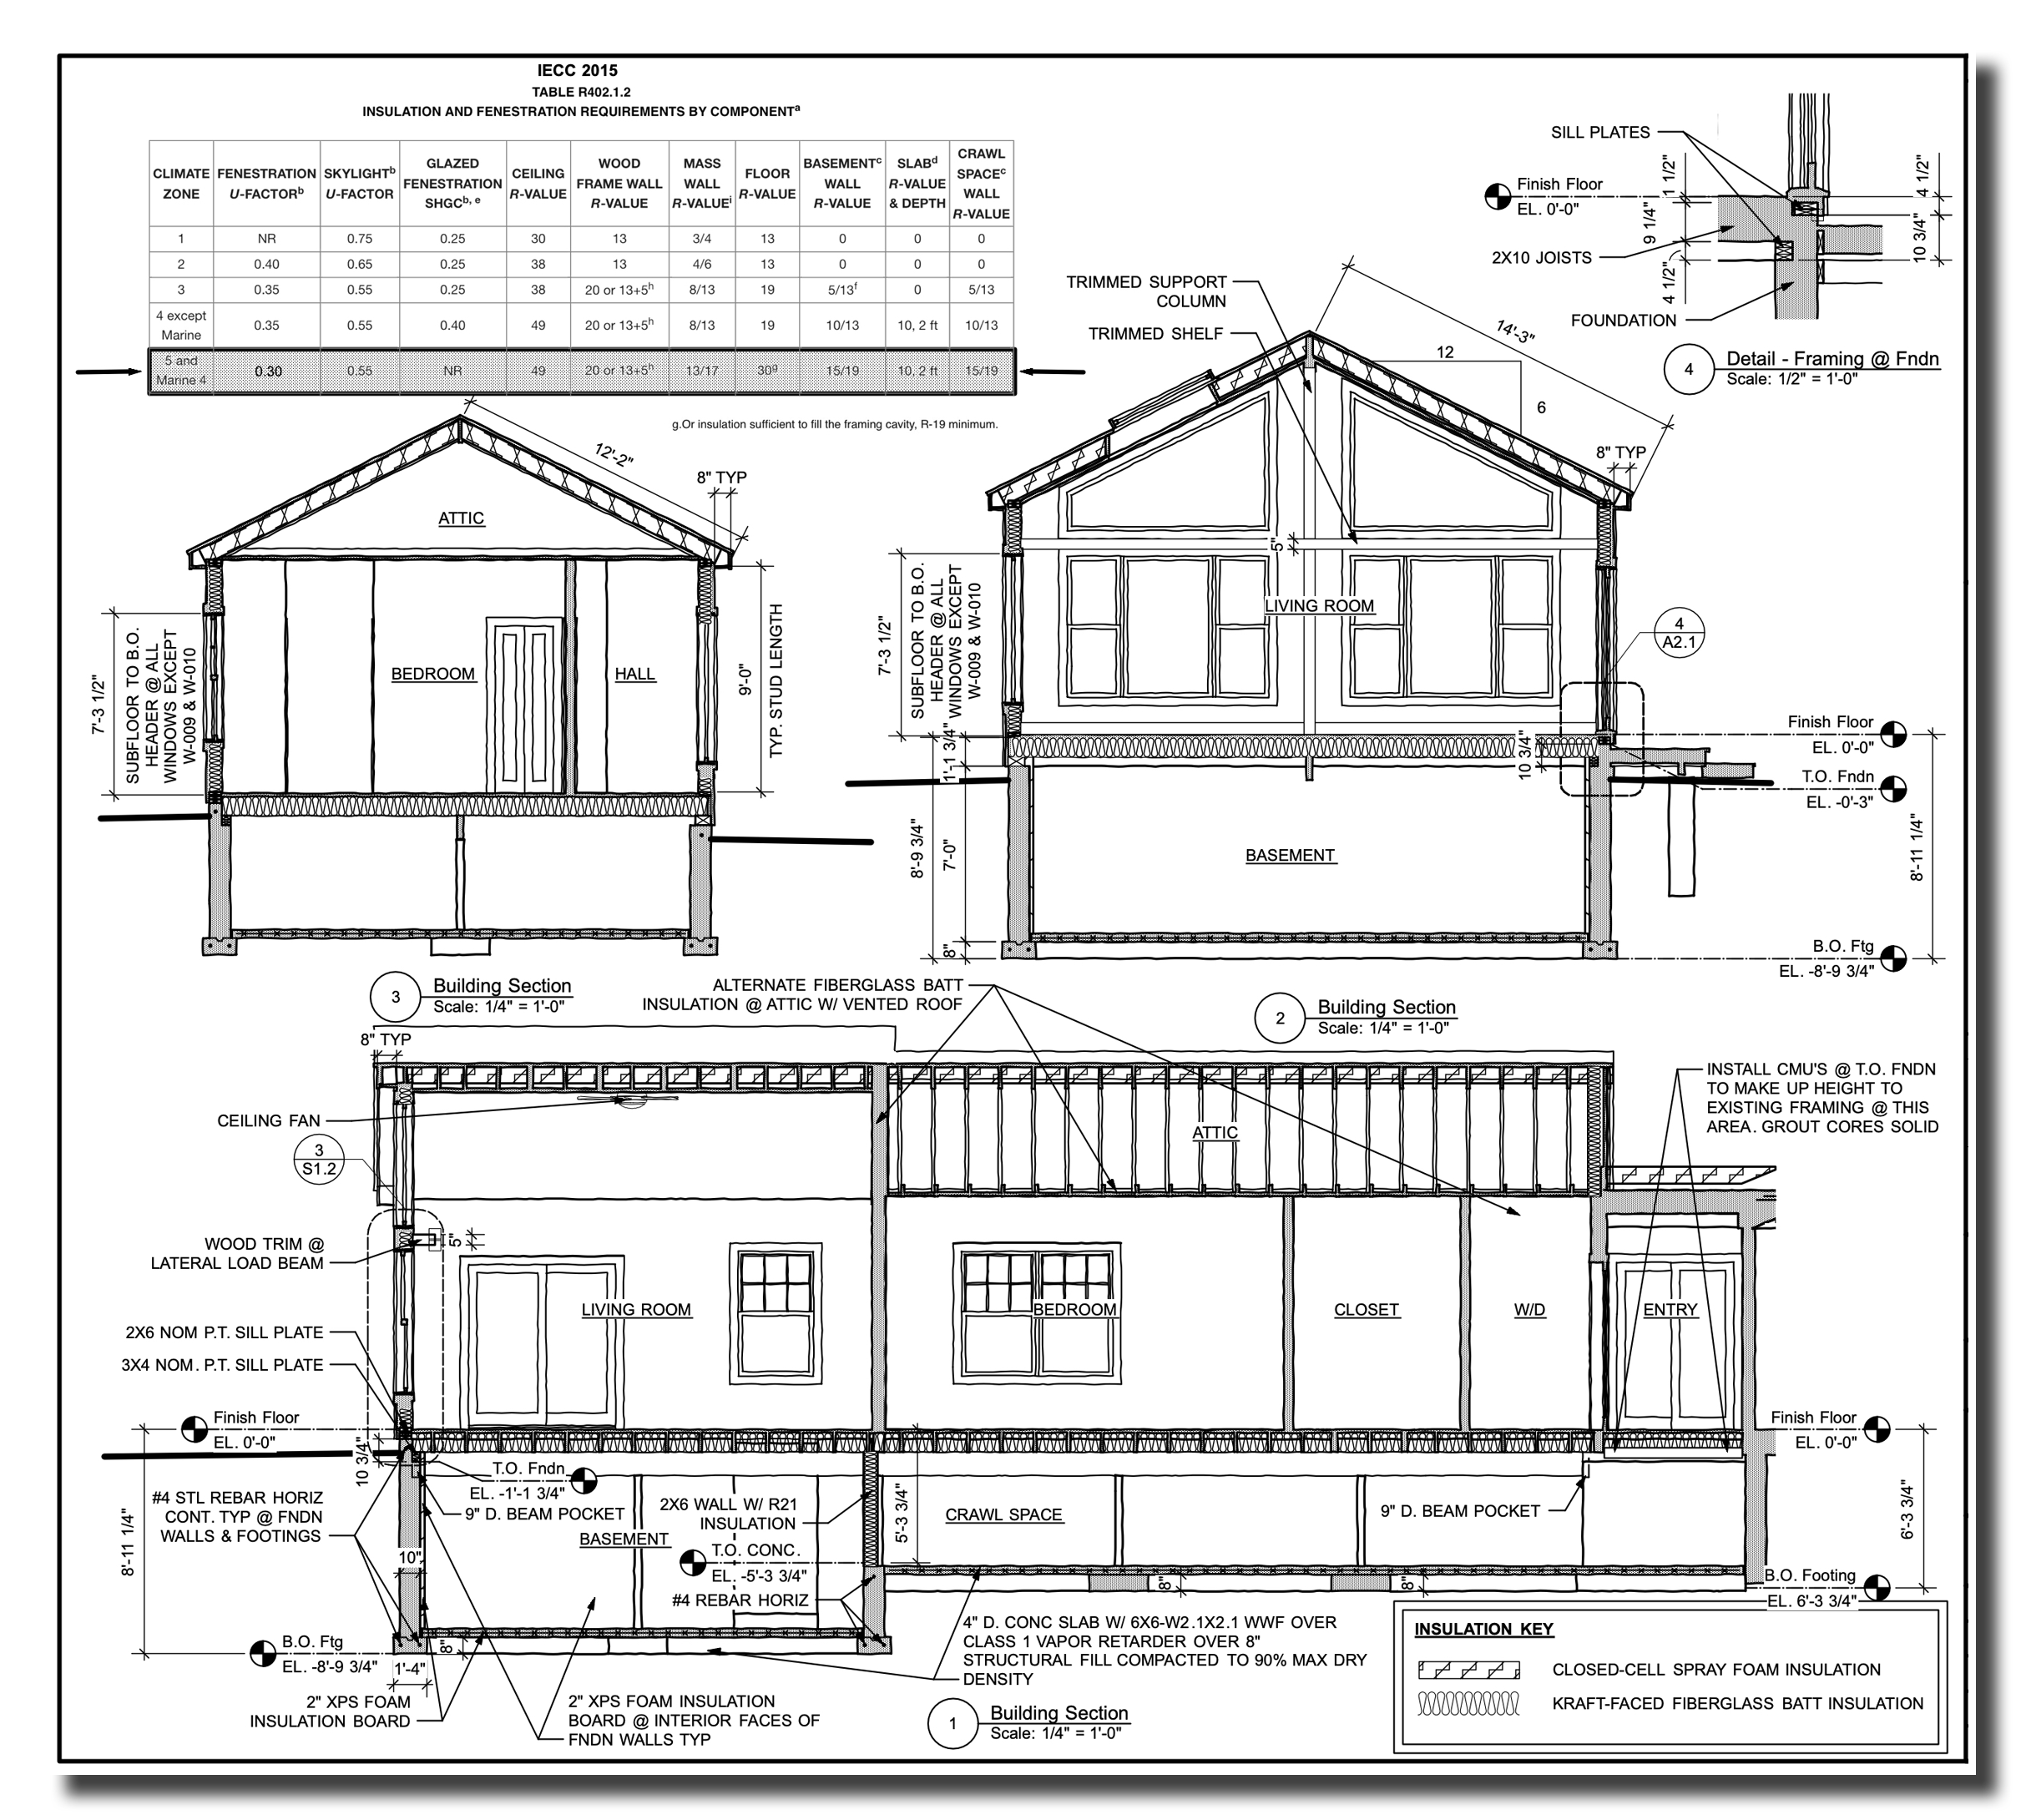 Building Sections